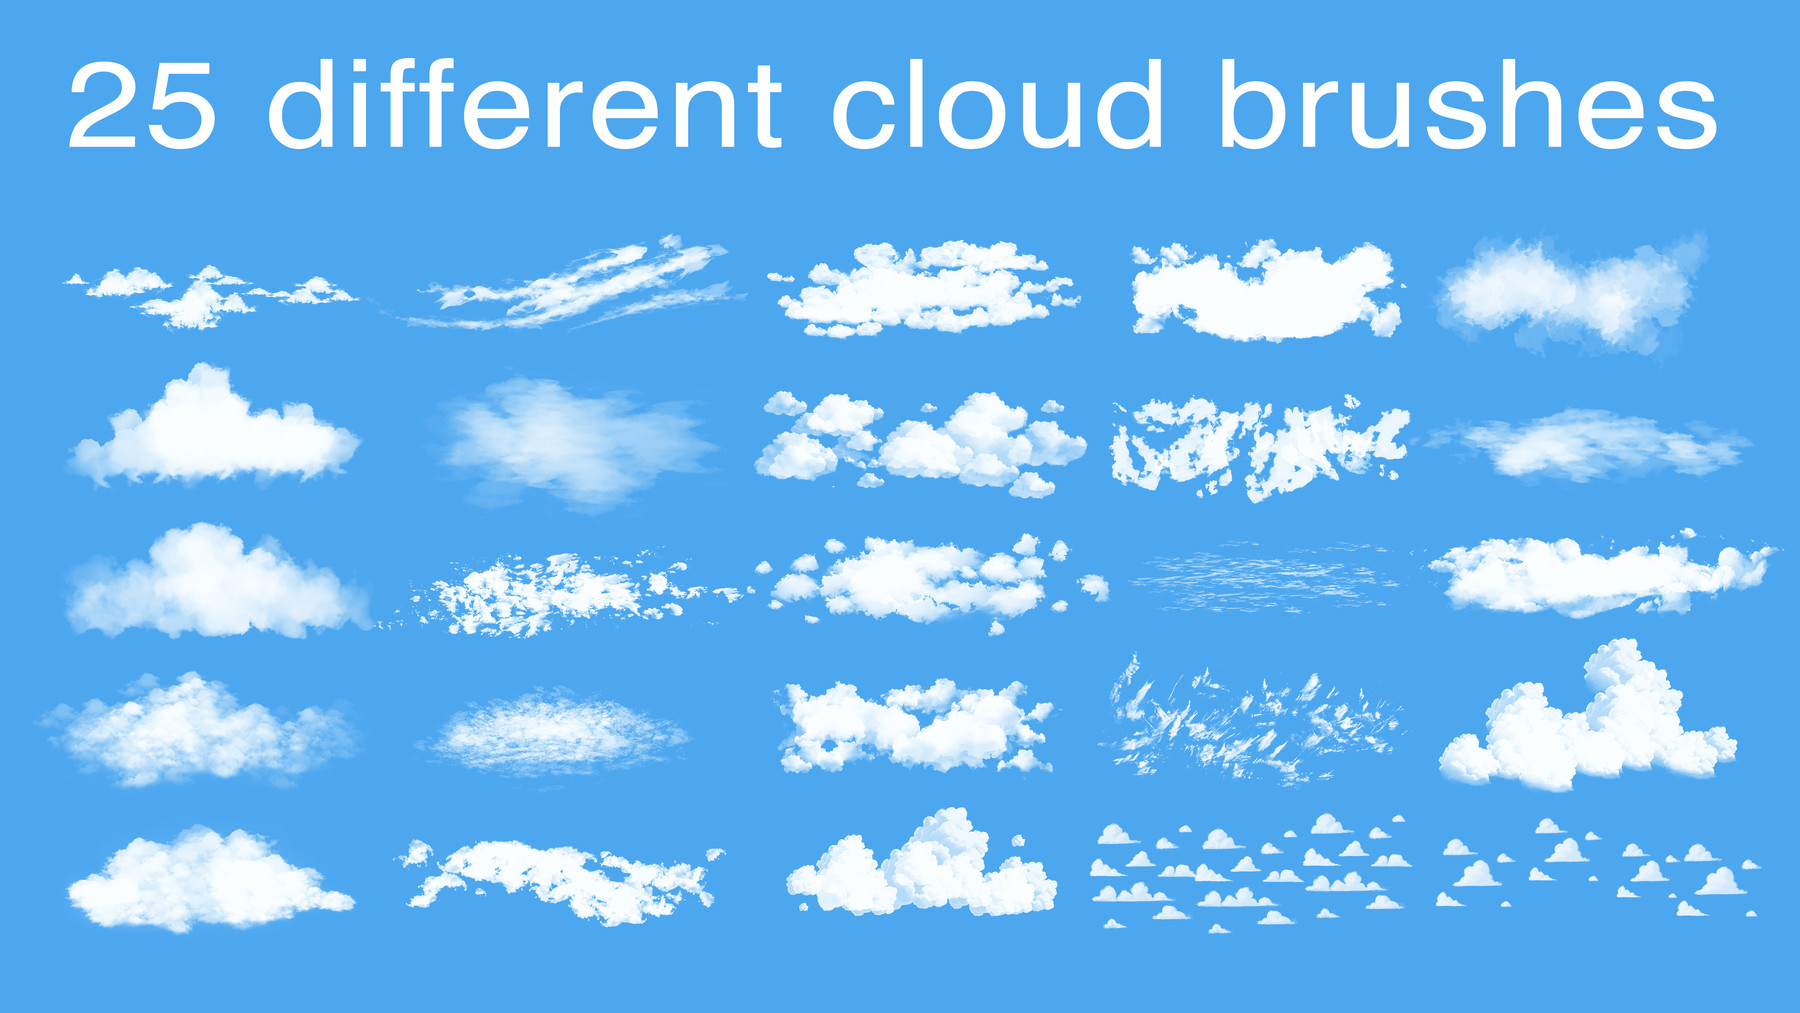 adobe photoshop clouds brushes free download